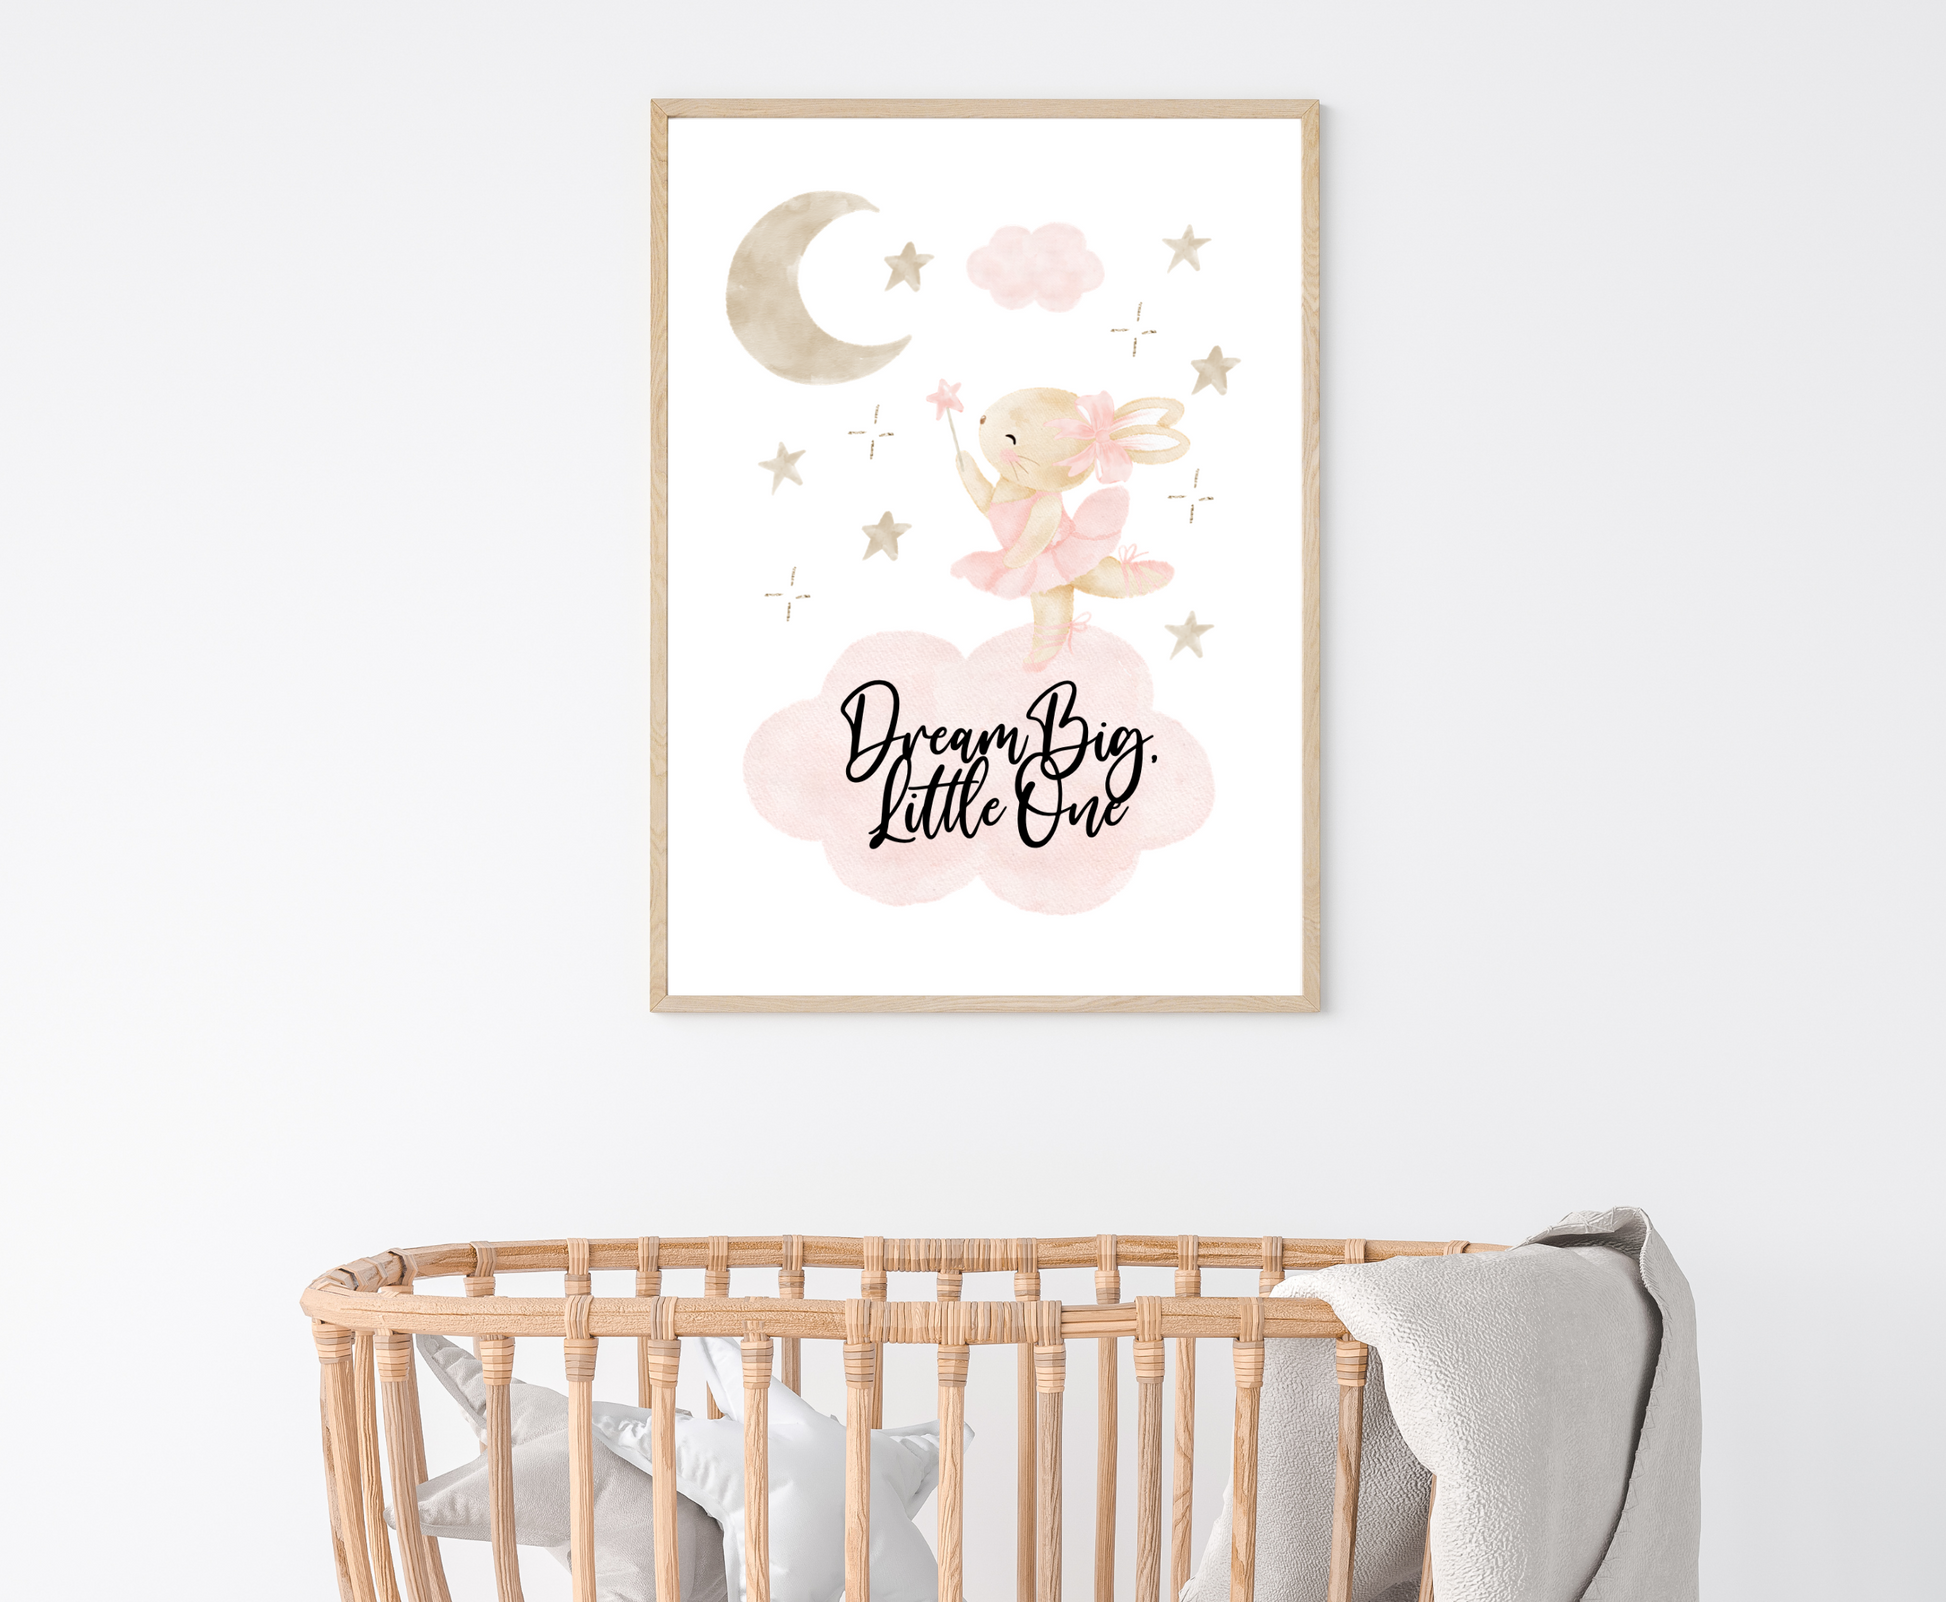 A little girl’s room graphic hanging above a baby’s cradle and showing a grey-pinkish crescent with a brown teddy rabbit wearing a pink bow, with a few tiny grey-pinkish stars beside it and two pinkish clouds. It also includes a piece of writing that says “Dream Big Little One”.